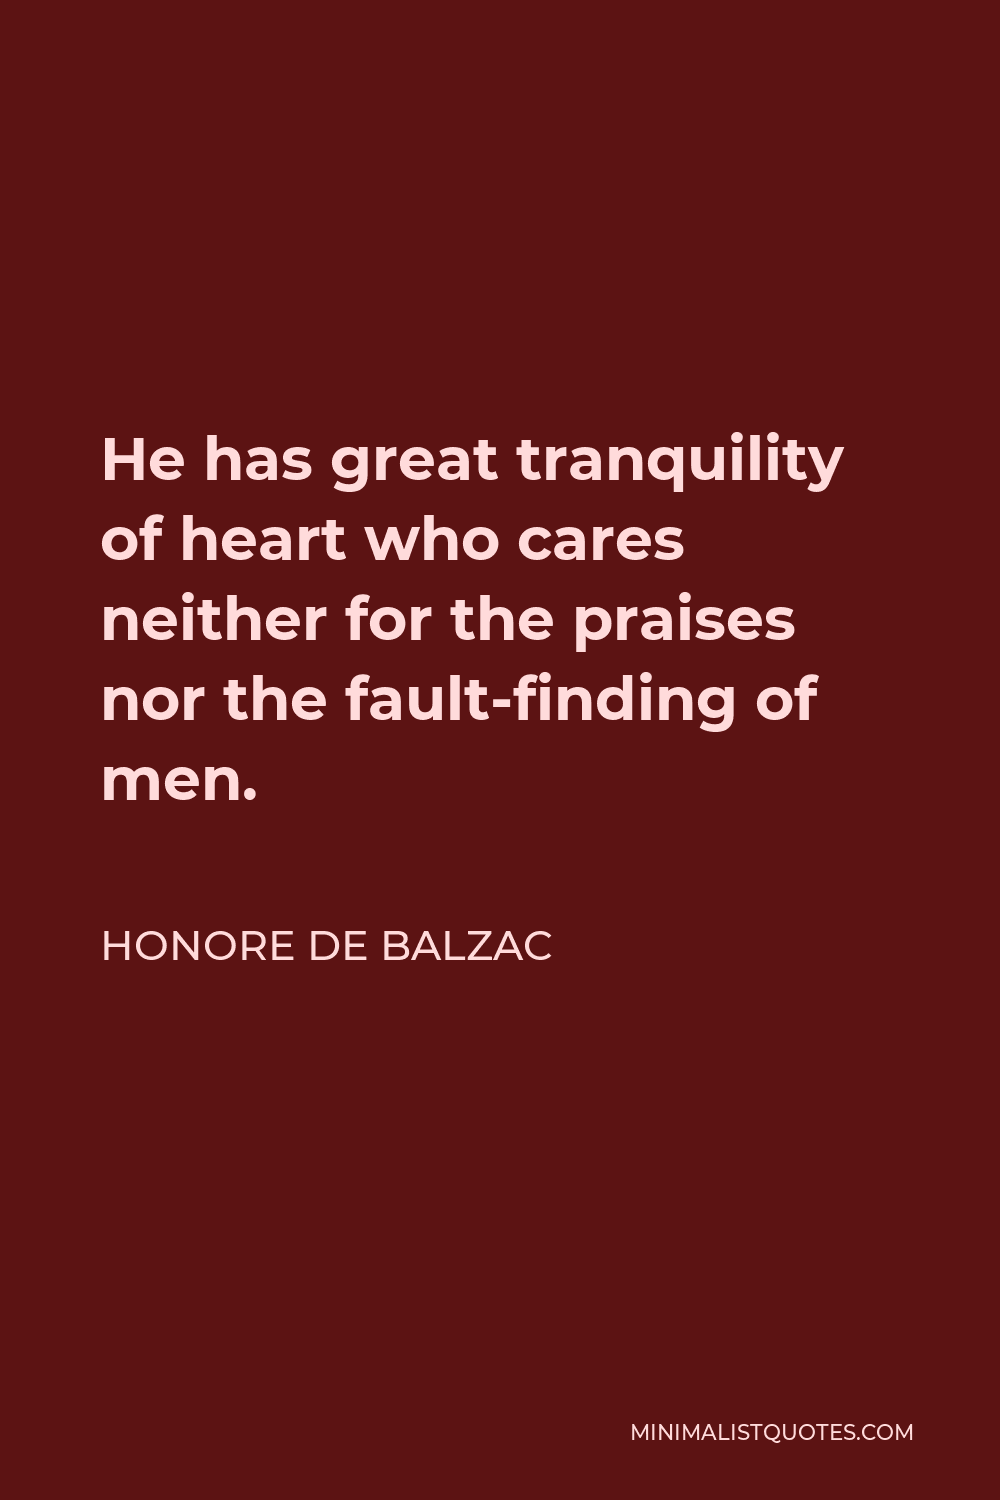 Honore de Balzac Quote - He has great tranquility of heart who cares neither for the praises nor the fault-finding of men.